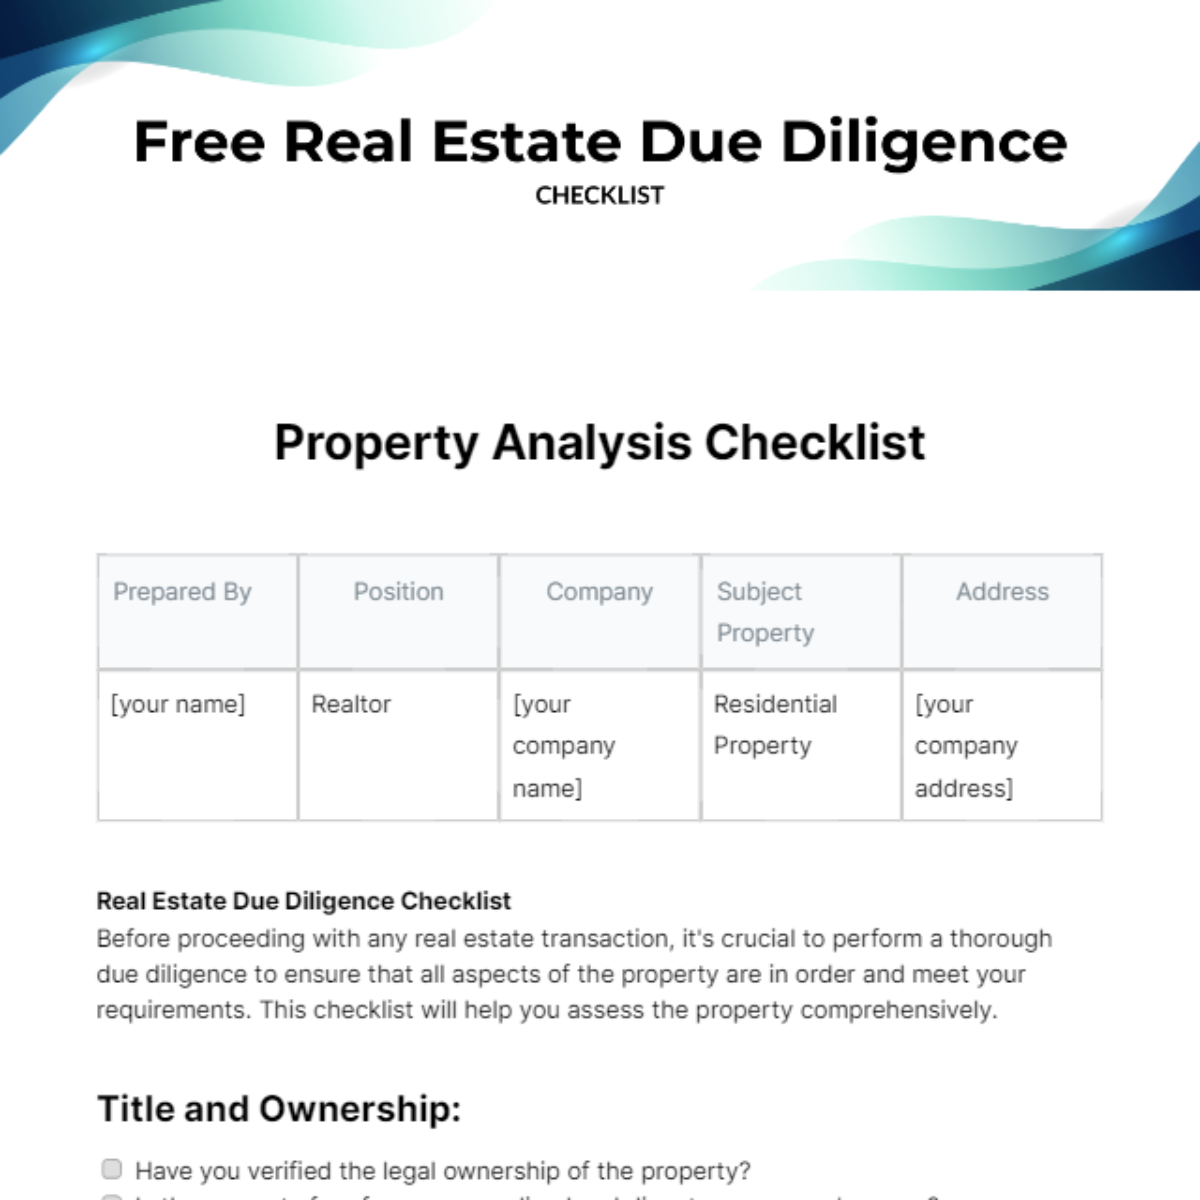 Real Estate Due Diligence Checklist Template